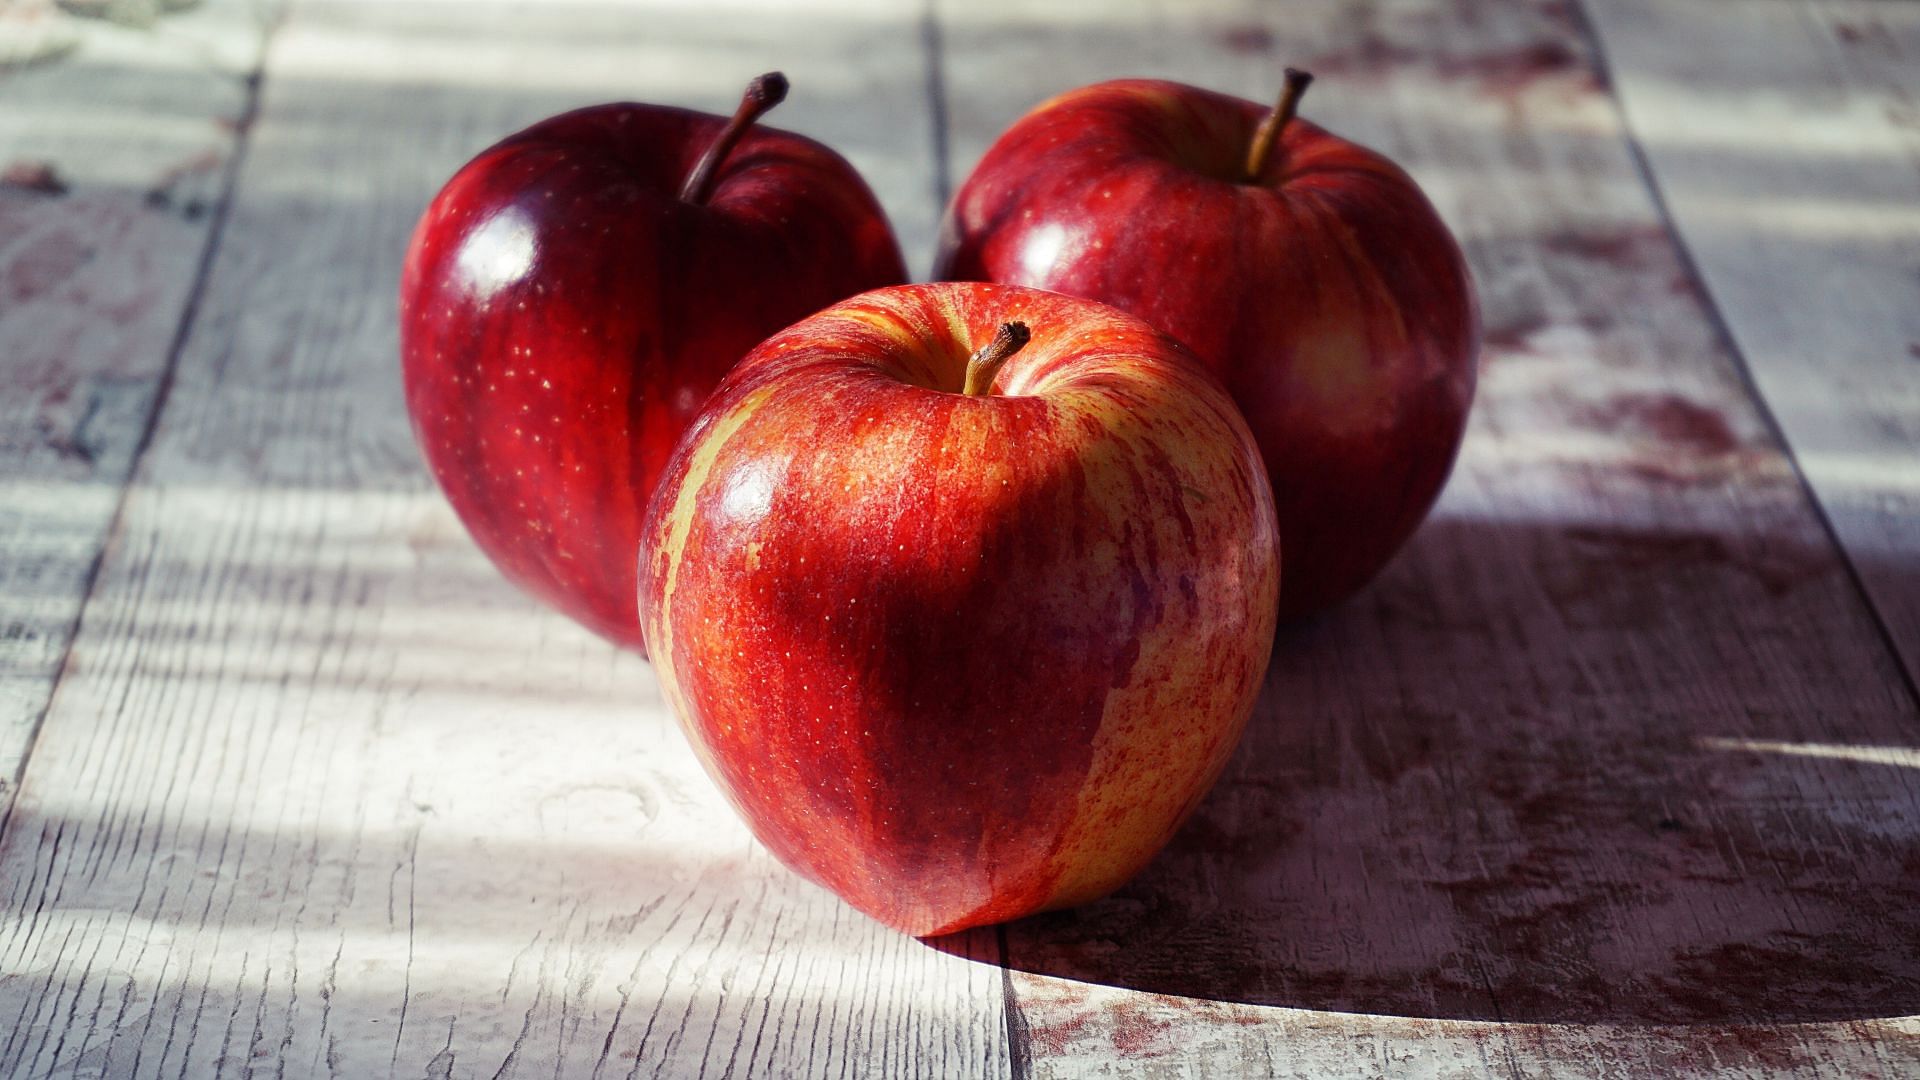 Apples are one of the healthiest fruits you can eat (Image via Pexels @Suzy Hazelwood)